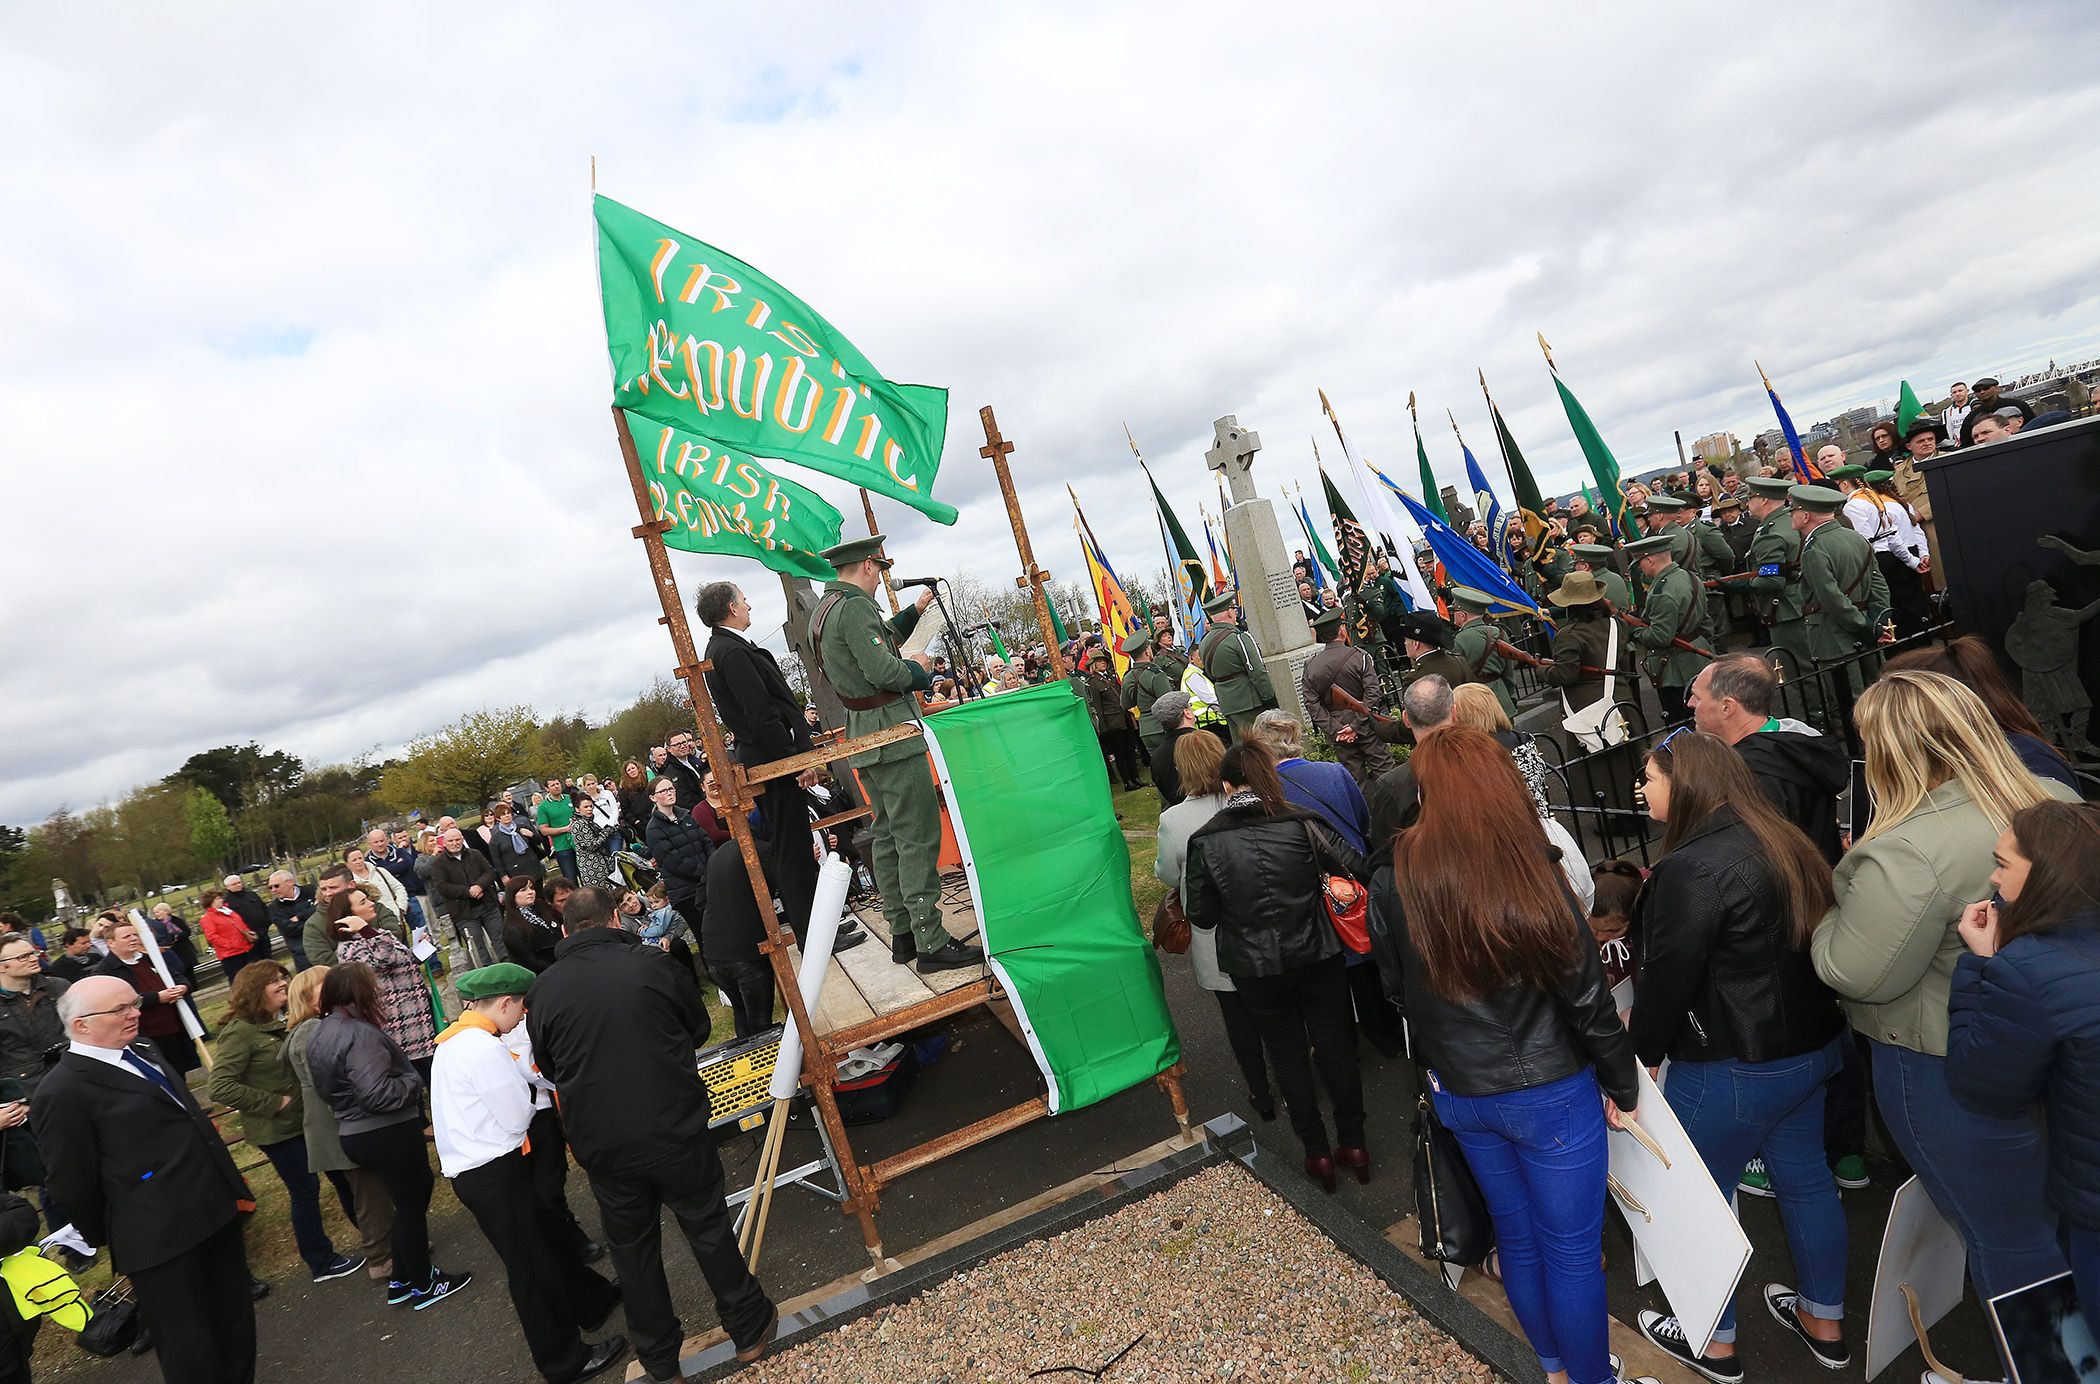 MILLTOWN: How come the Easter parades are always ignored?